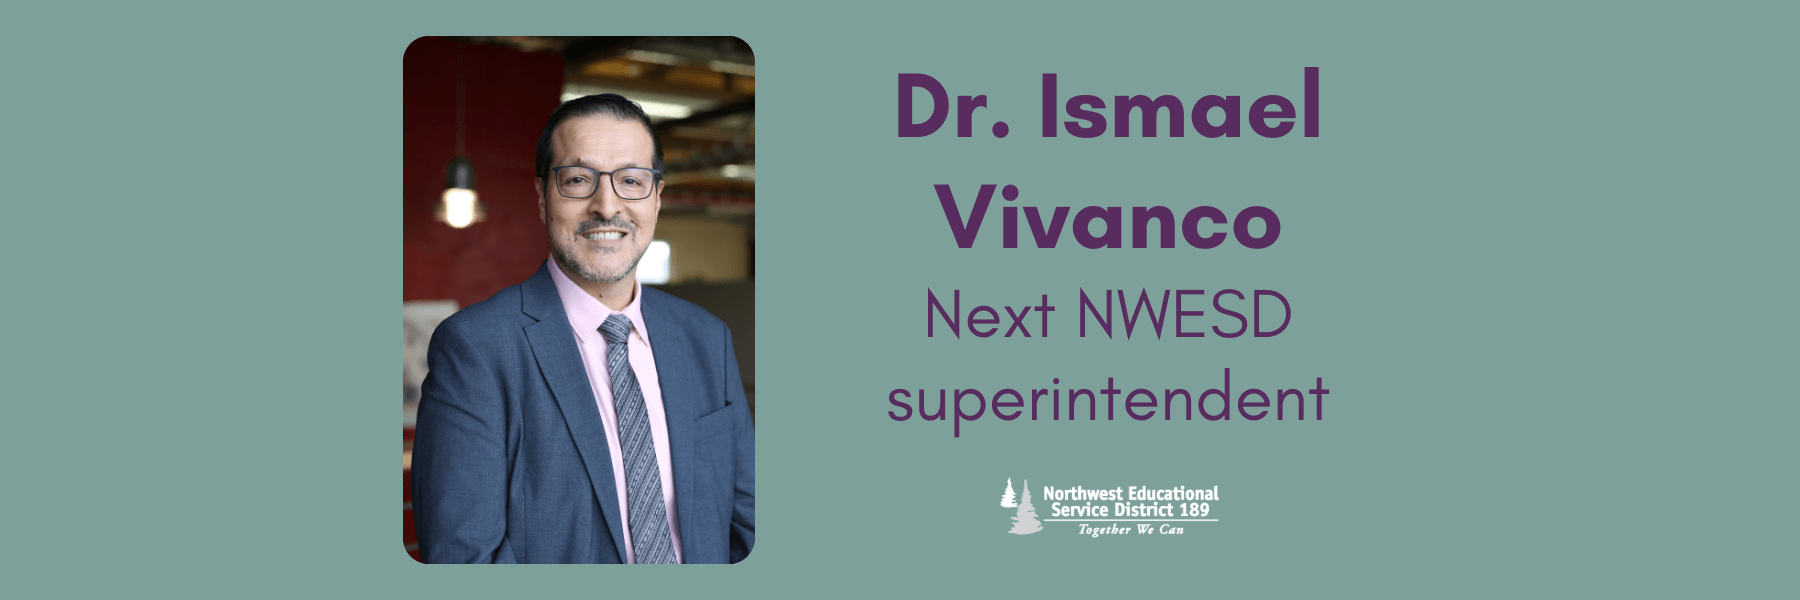 Green background banner with photo of Dr. Ismael Vivanco and his name and future title of superintendent